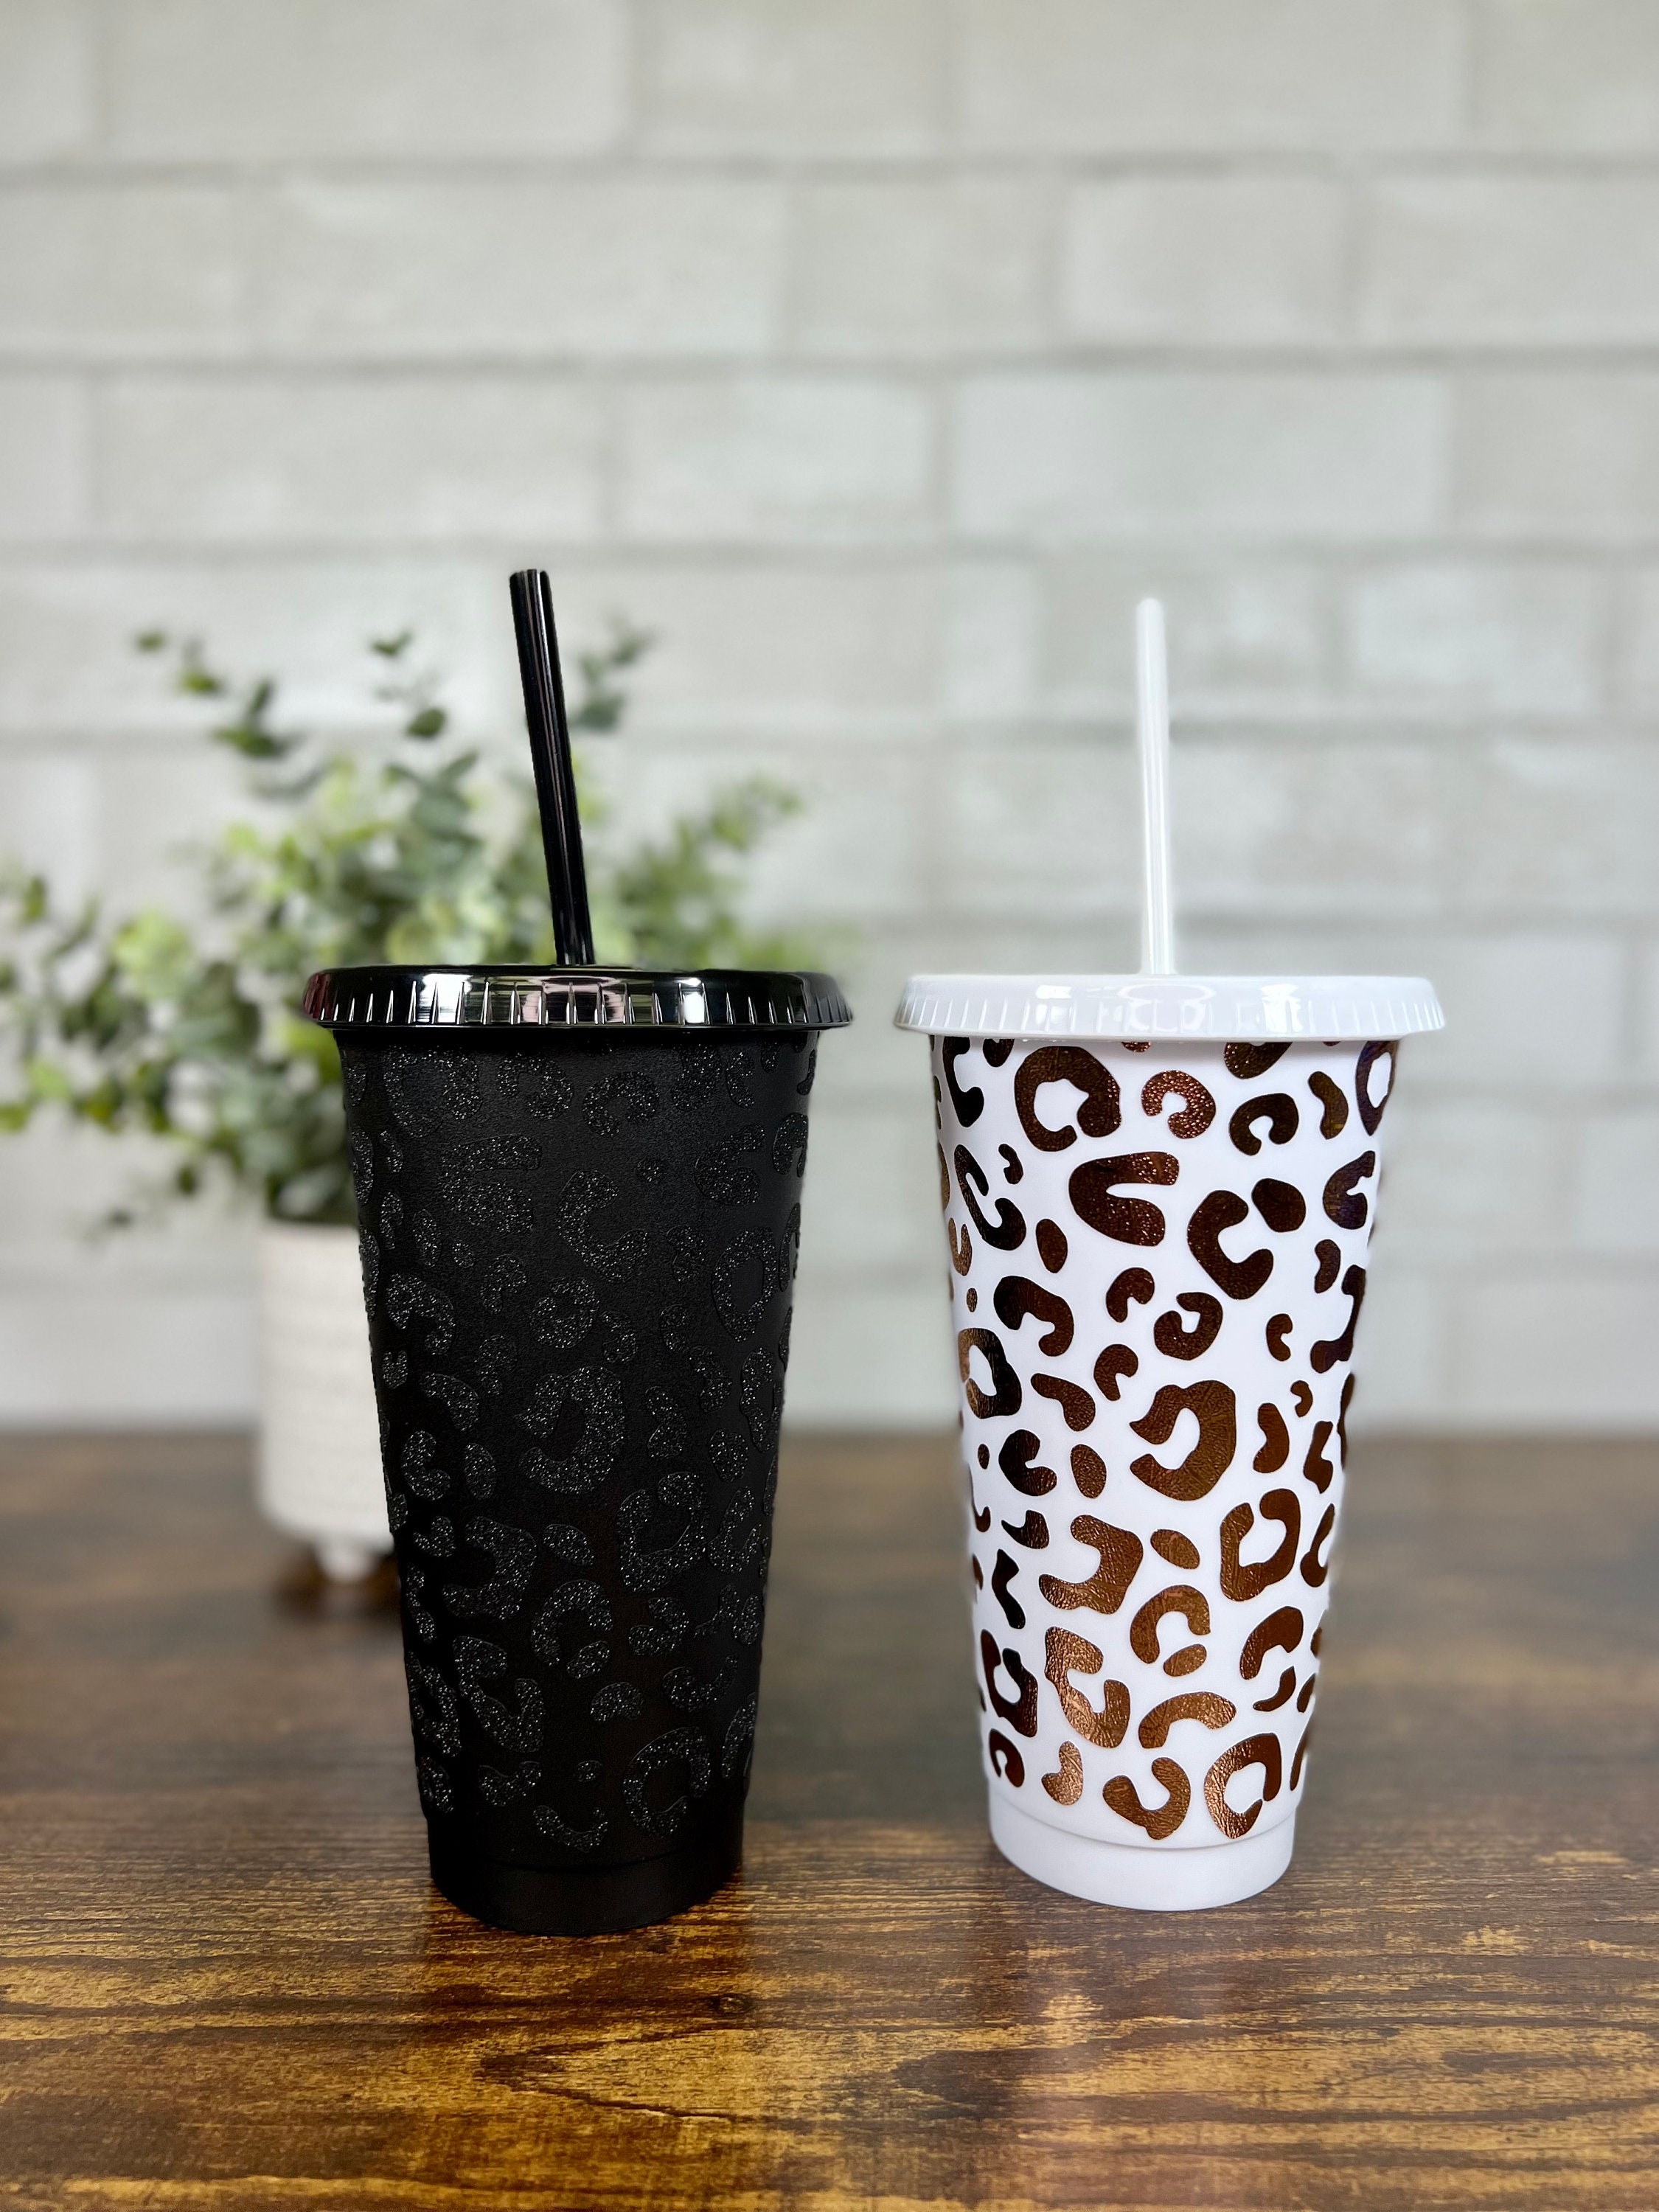 Black Glitter Cheetah Print Reusable Cold and Iced Coffee Cup Gift